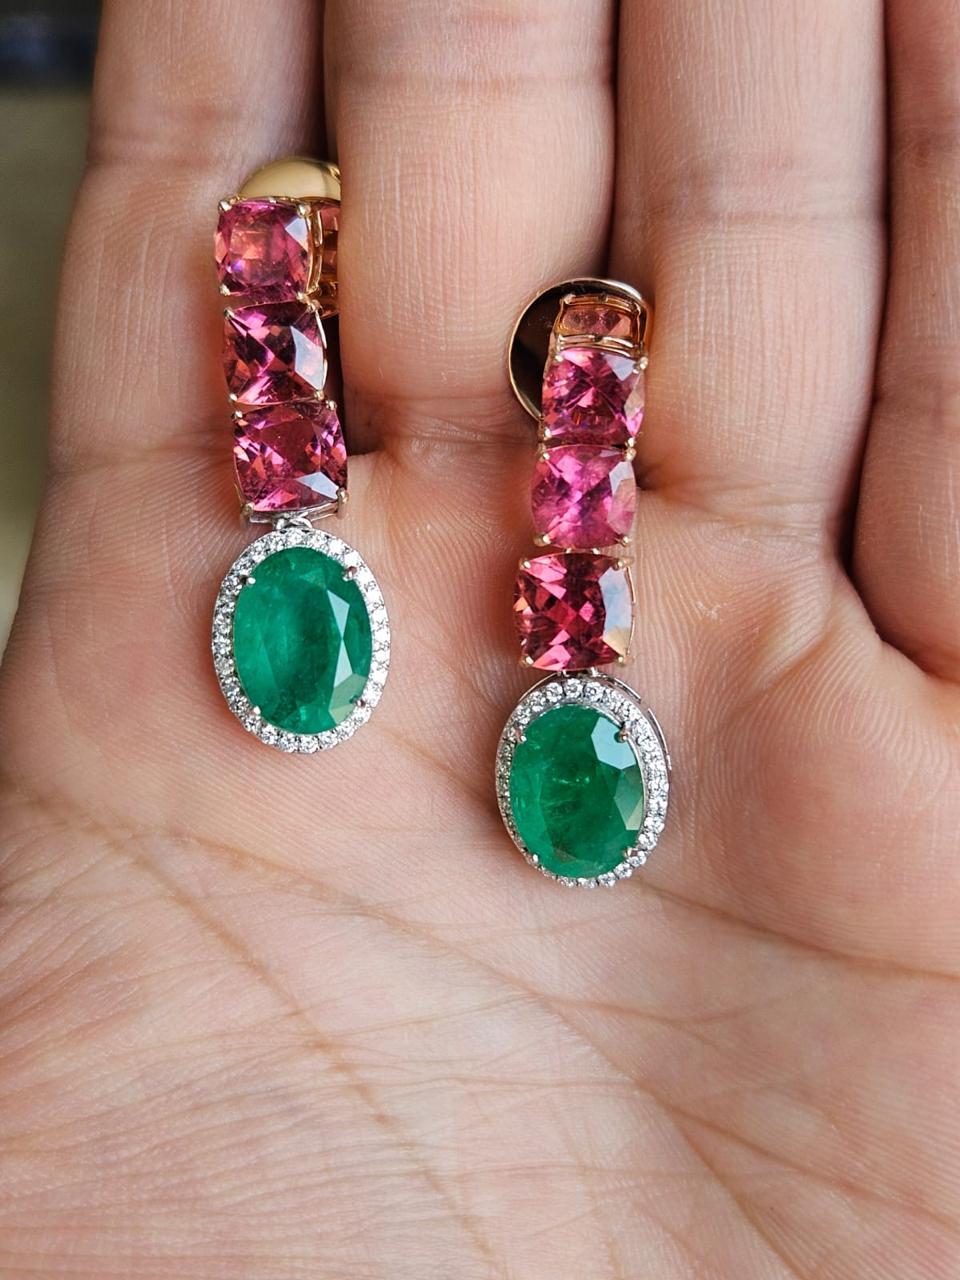 A very gorgeous and beautiful, modern style, Emerald & Tourmaline Chandelier Earrings set in 18K White Gold & Diamonds. The weight of the Tourmalines is 7.89 carats. The weight of the Emeralds is 7.08 carats. The Emeralds are completely natural,